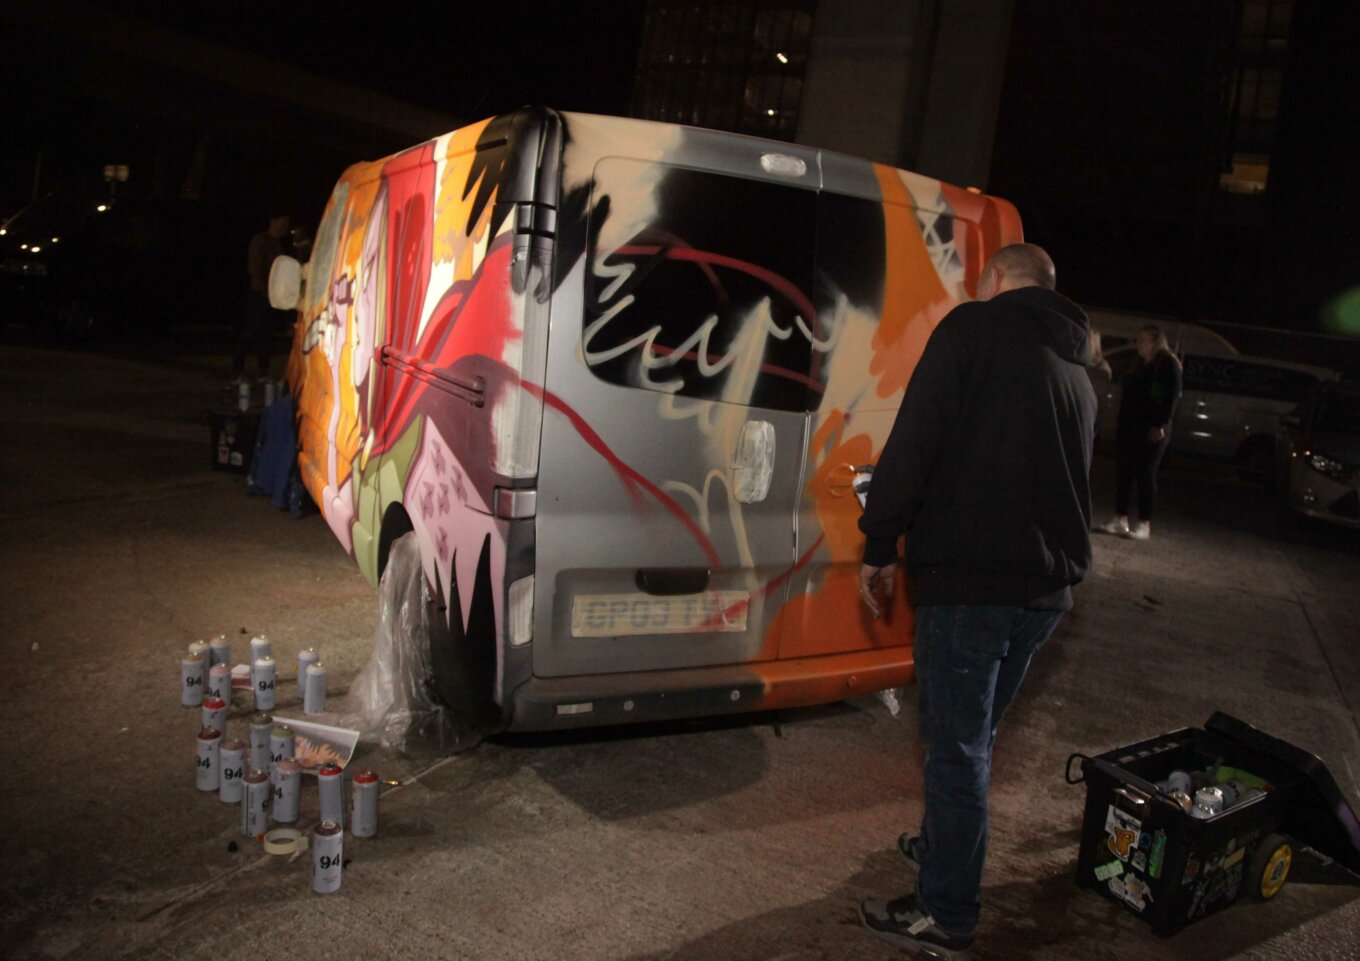 Jay and Hammo painting a van at Art Battle XX in Stockport